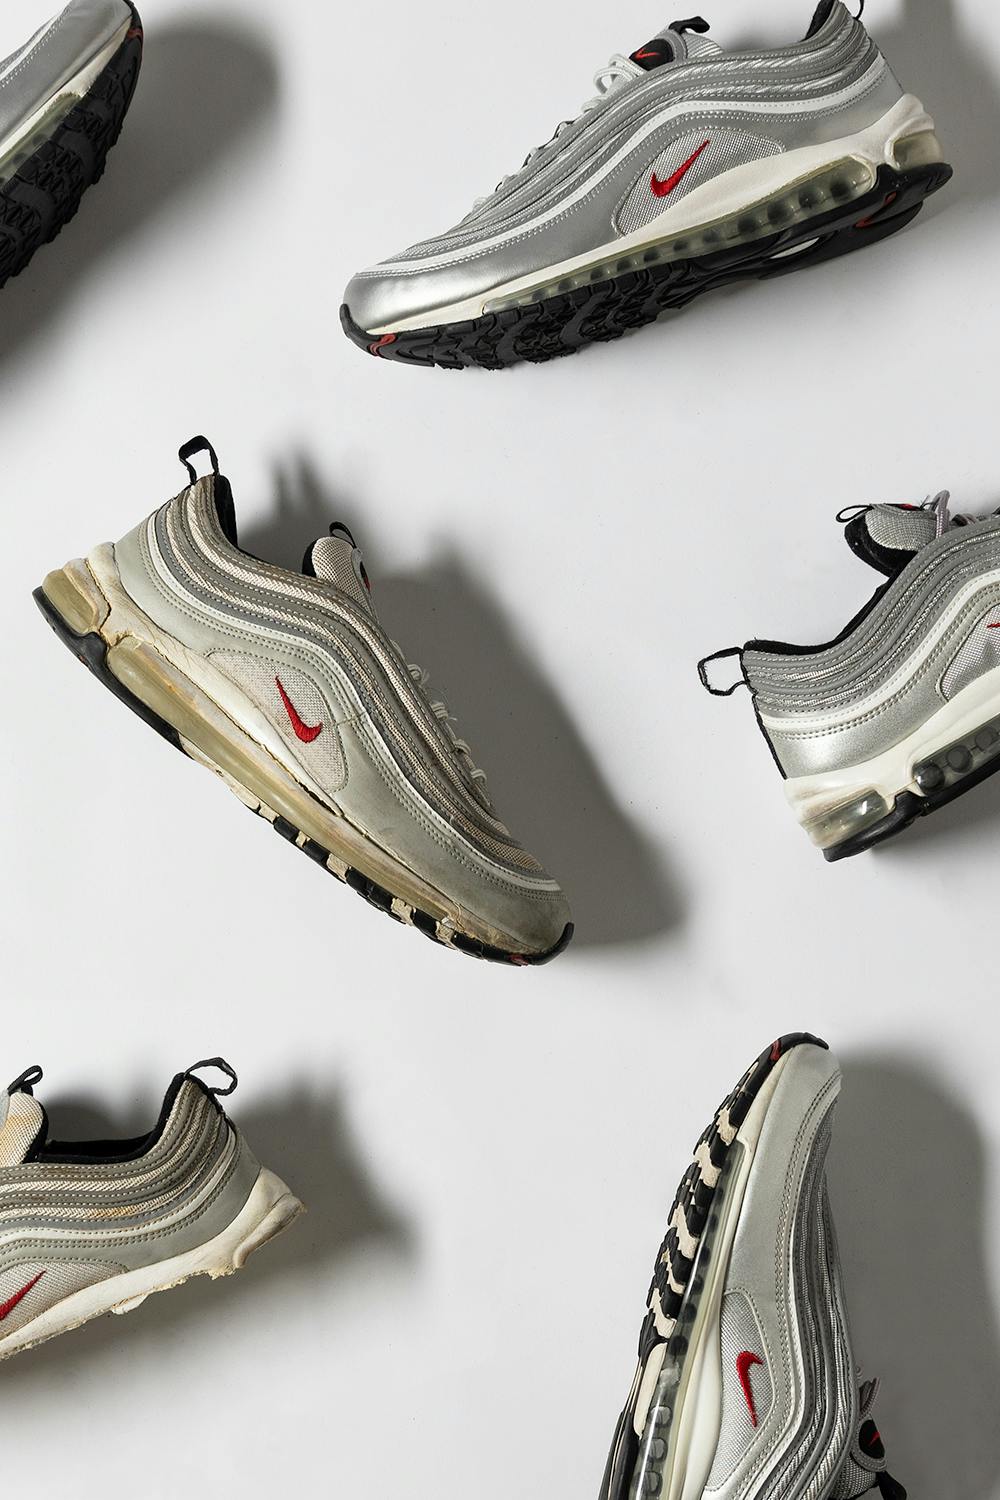 PROGRESSIVE PERMANENCE: The Story of Nike's Air Max 97 “Silver Bullet”